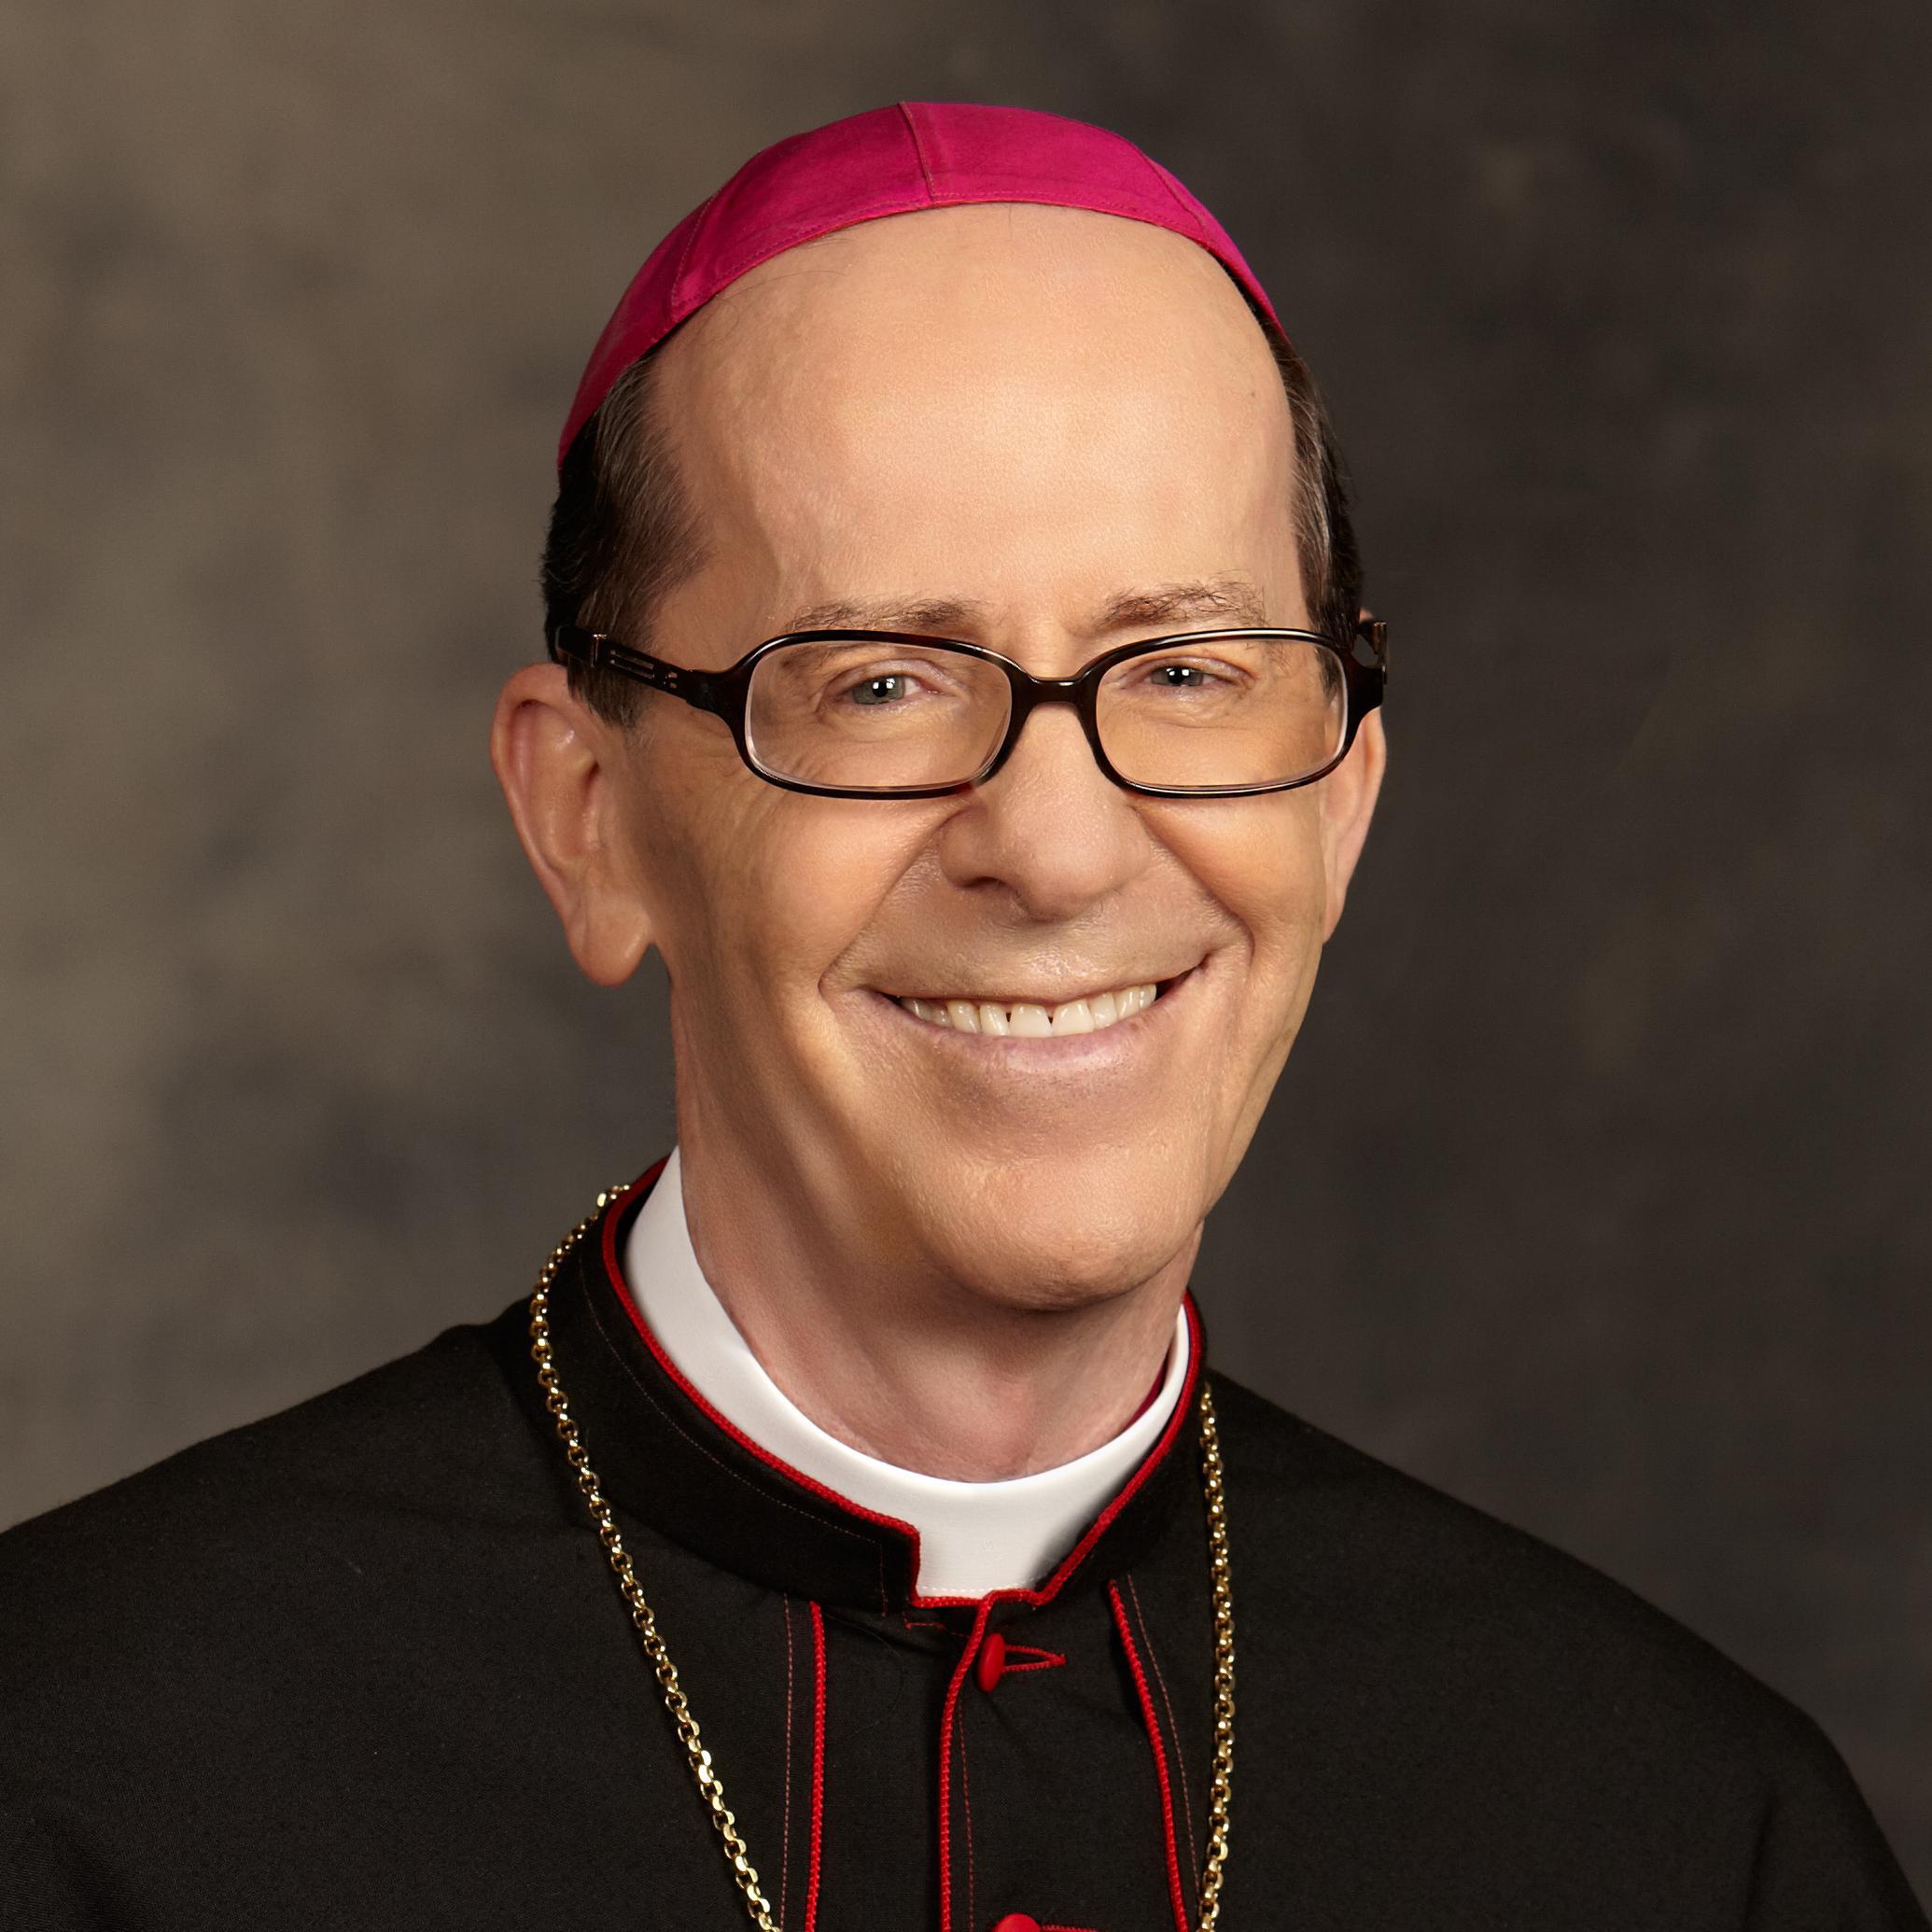 Bishop of the @phoenixdiocese. Read #VeneremurCernui, an Apostolic Exhortation on the Holy Eucharist at https://t.co/NaYyNAcUEp.